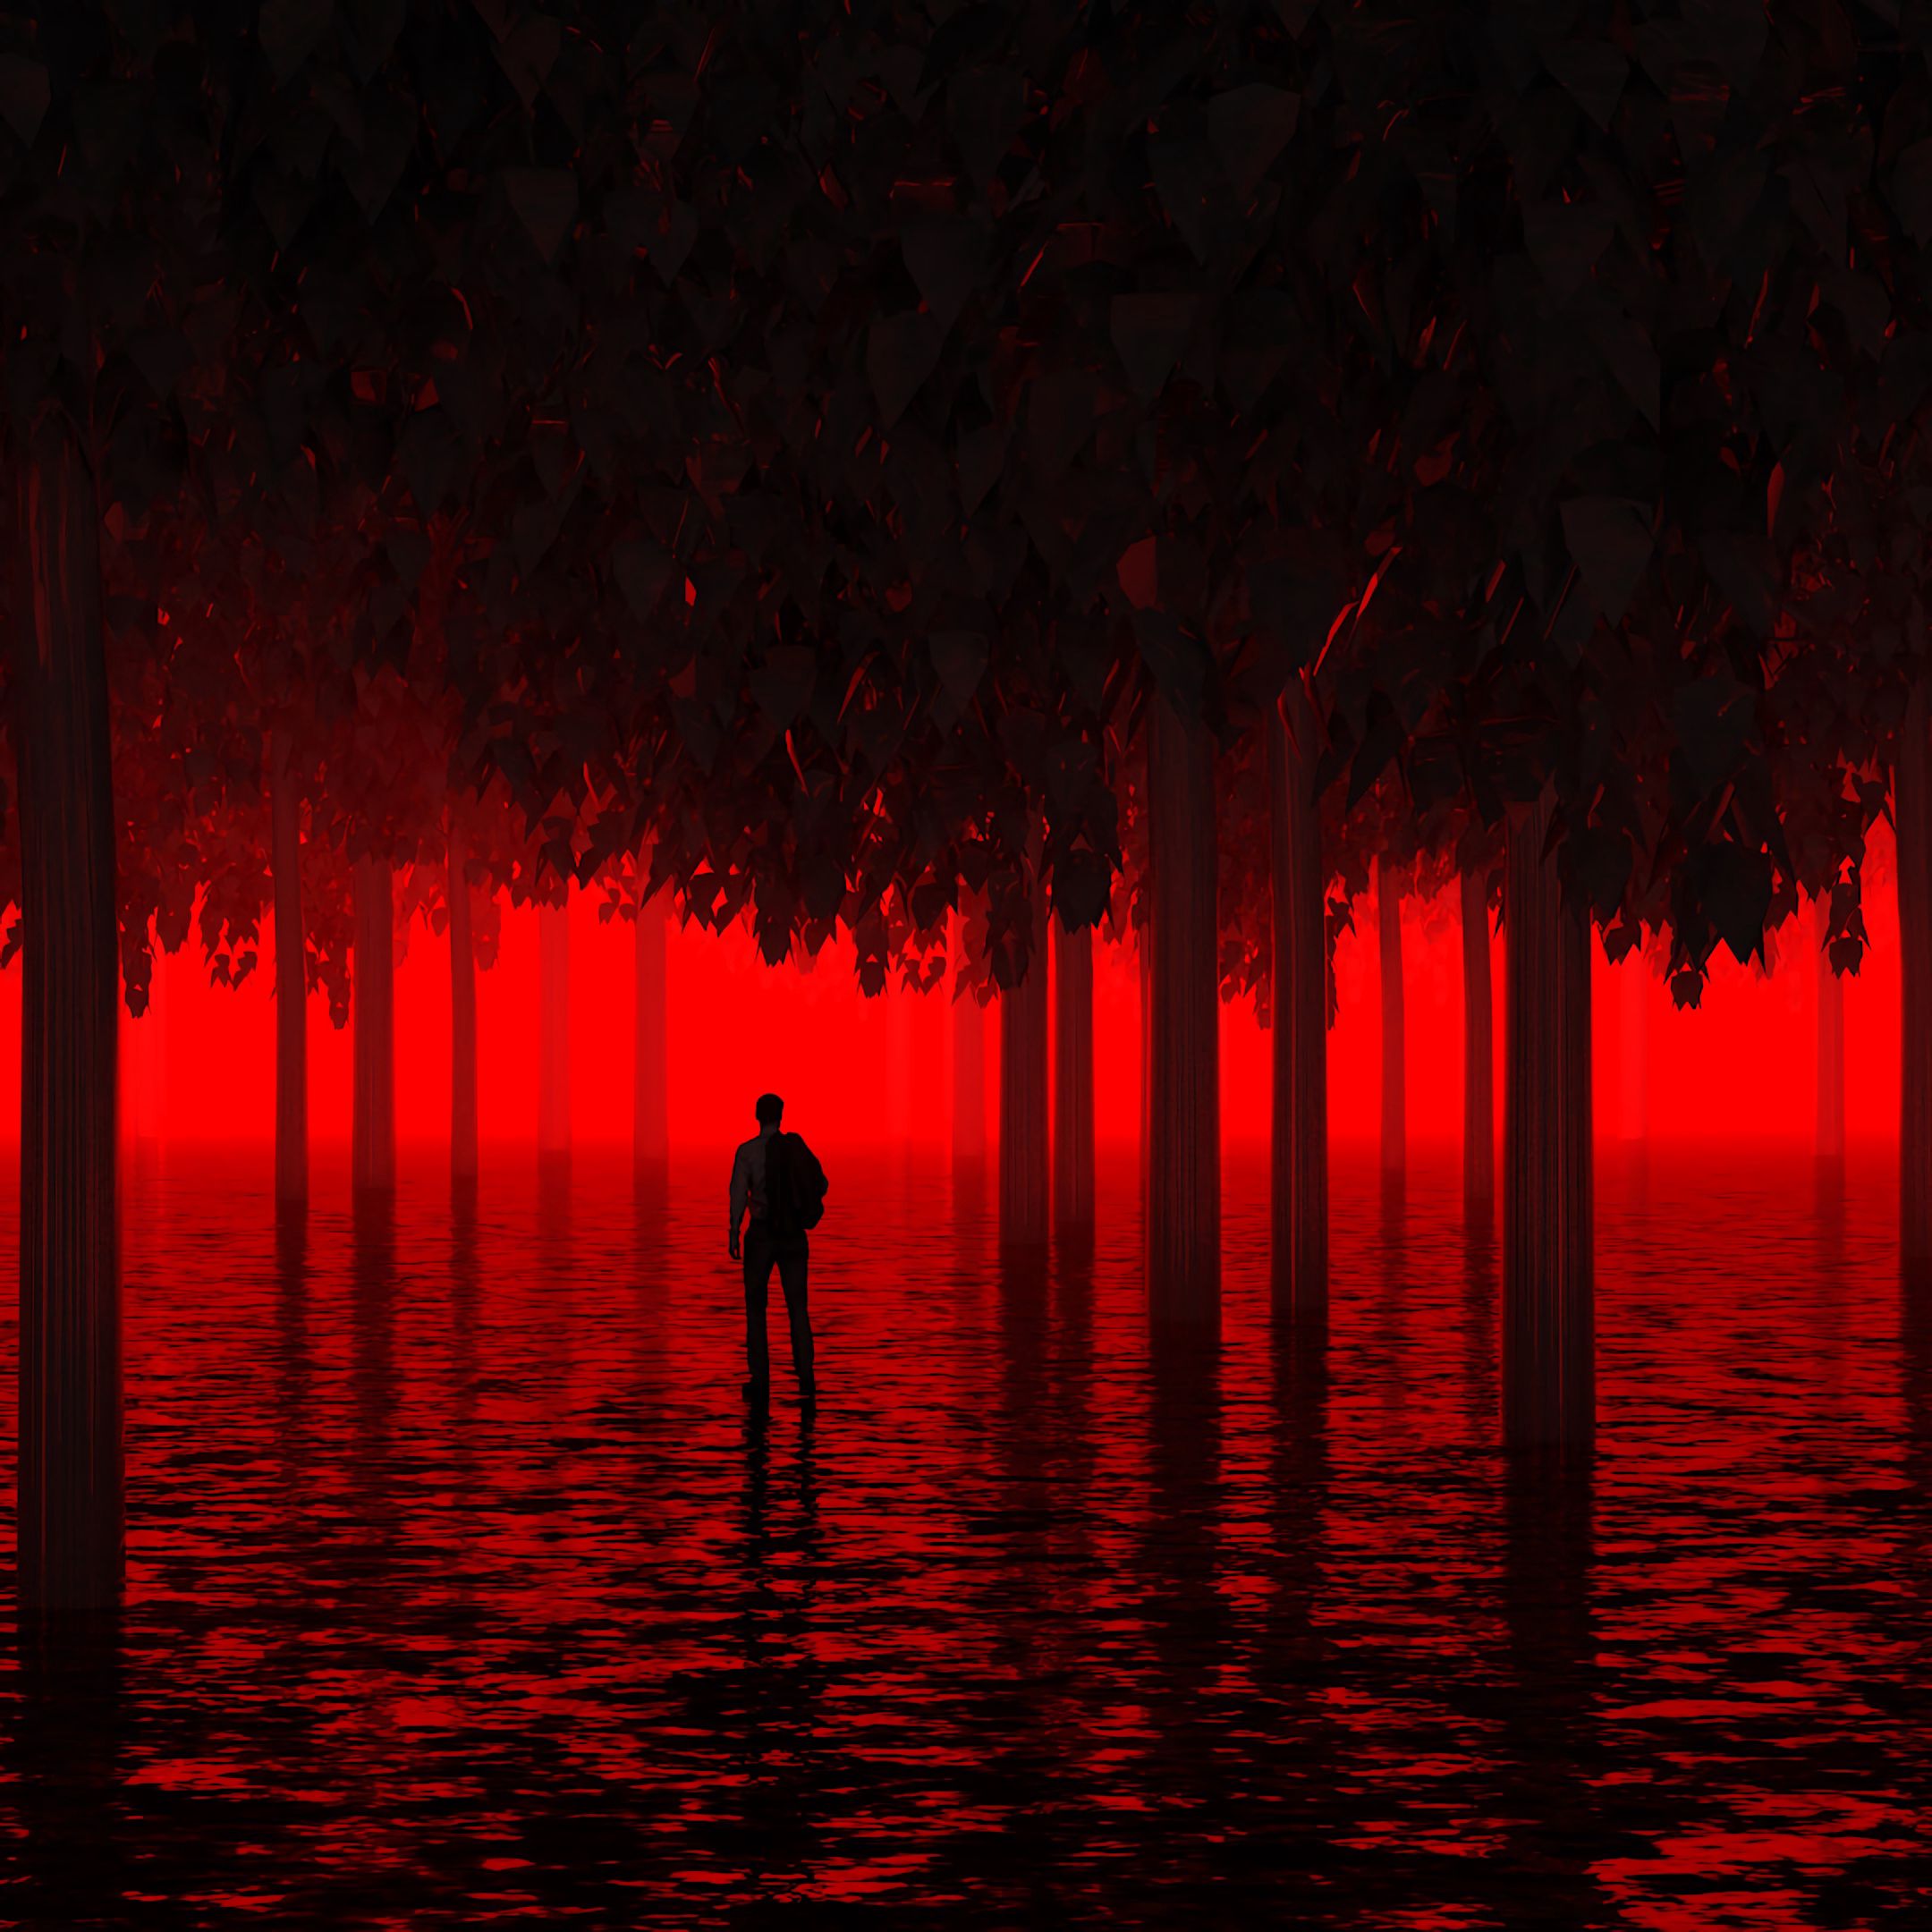 light, neon, human, dark, water, trees, red, shine, person, flooded, submerged images